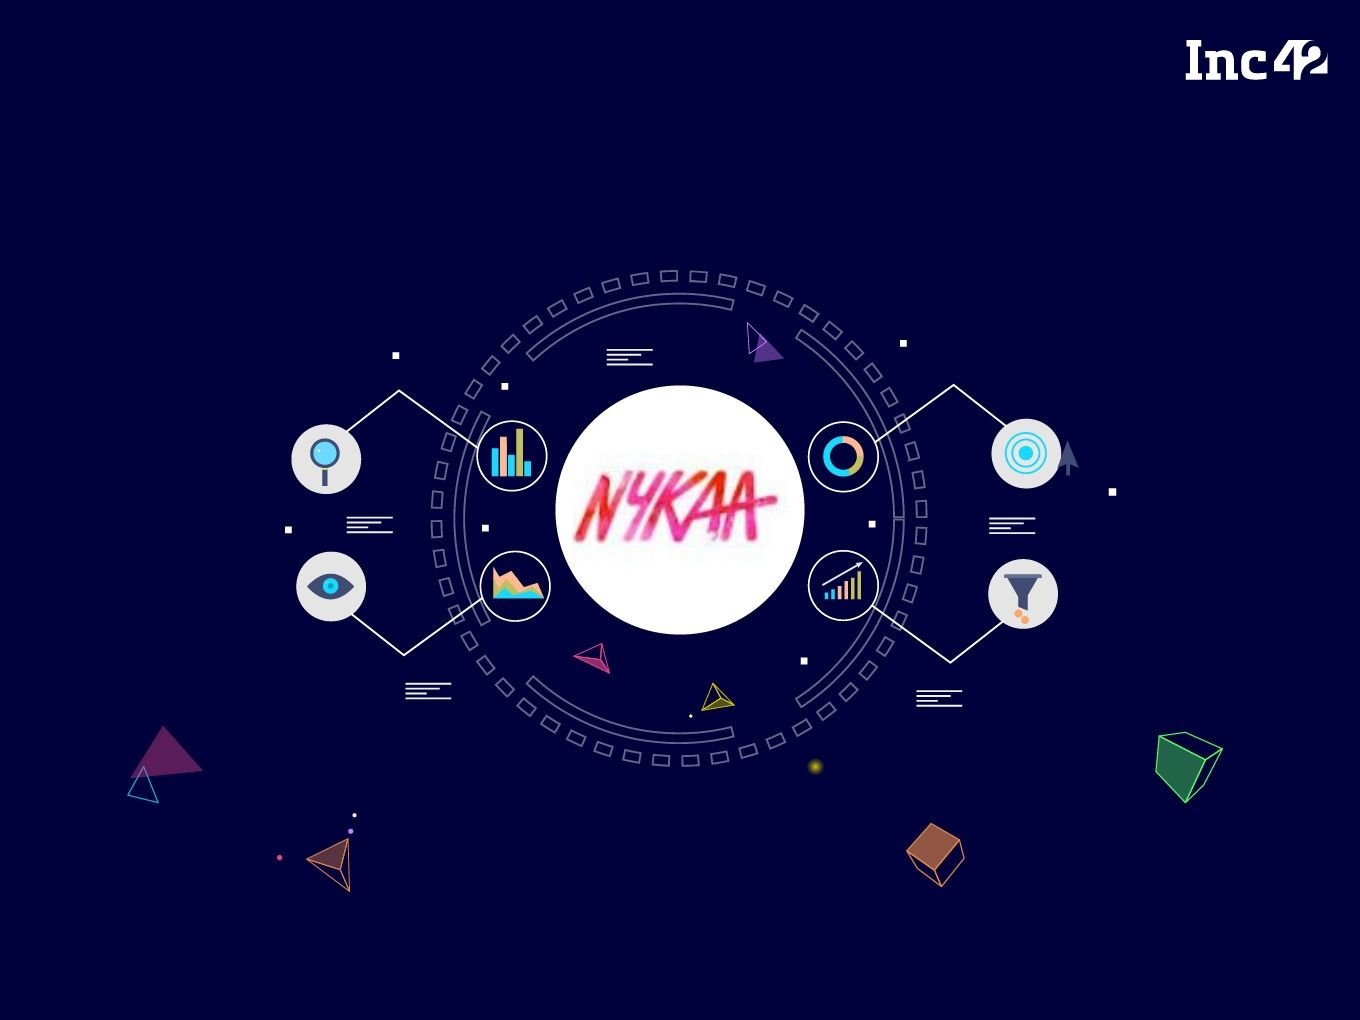 [What The Financials] Growing Revenues Marginally Faster Than Expenses Helps Nykaa Turn Profitable